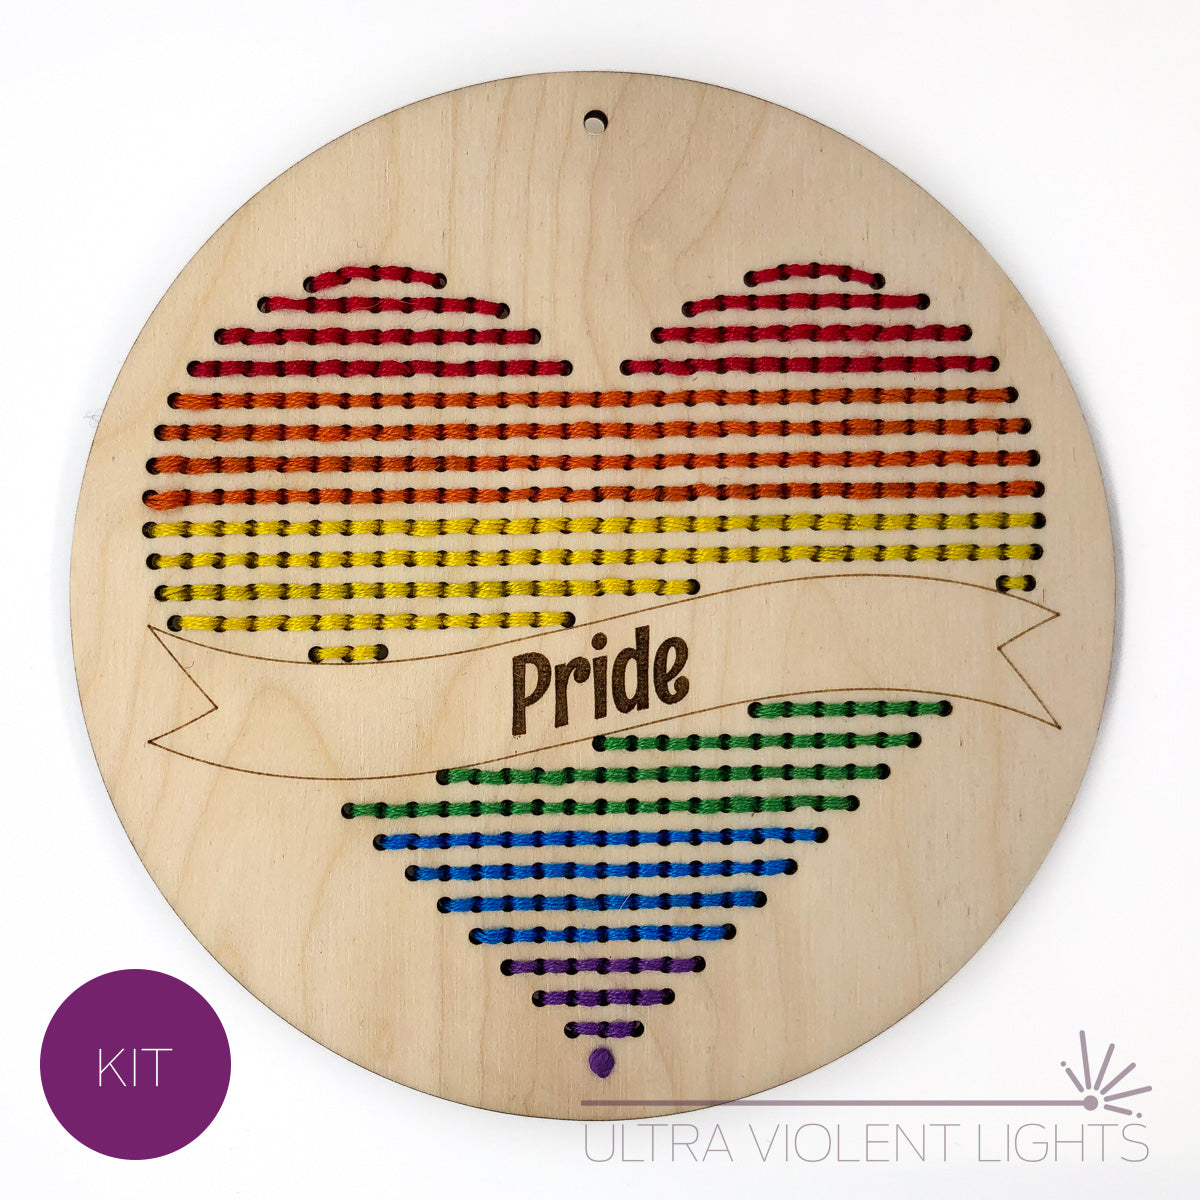 A heart embroidery kit done up in a rainbow, reading "Pride."